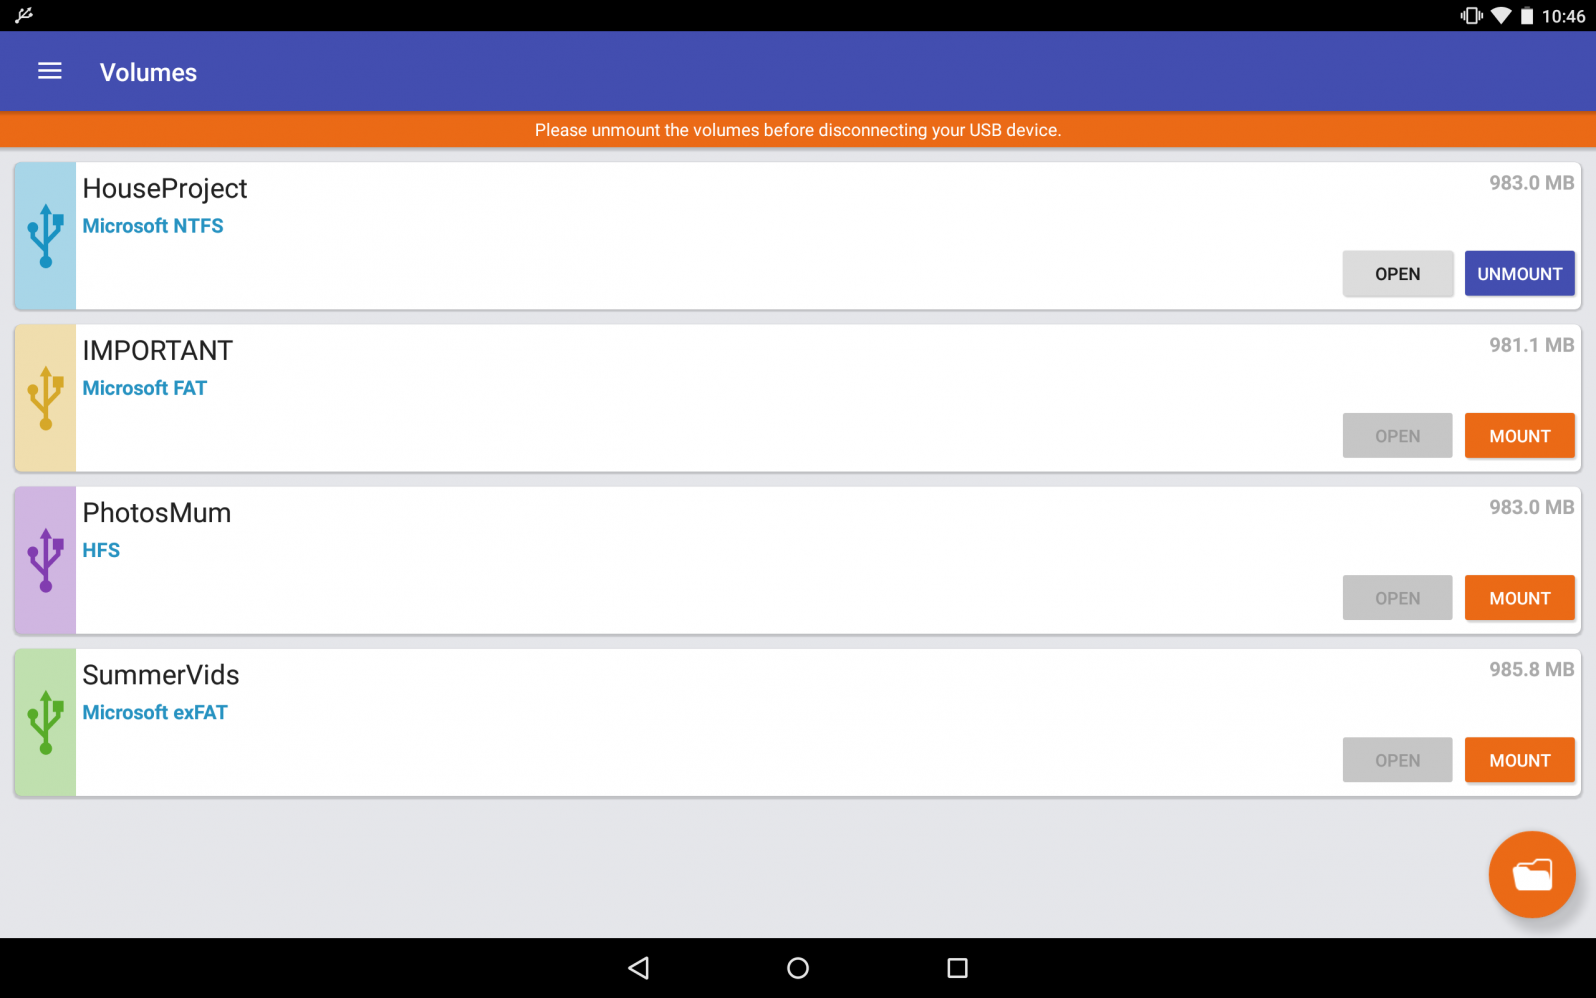 Microsoft exFAT/NTFS for USB On-The-Go by Paragon Software. Mount Flash Drive system on Android tablet. Screenshot.